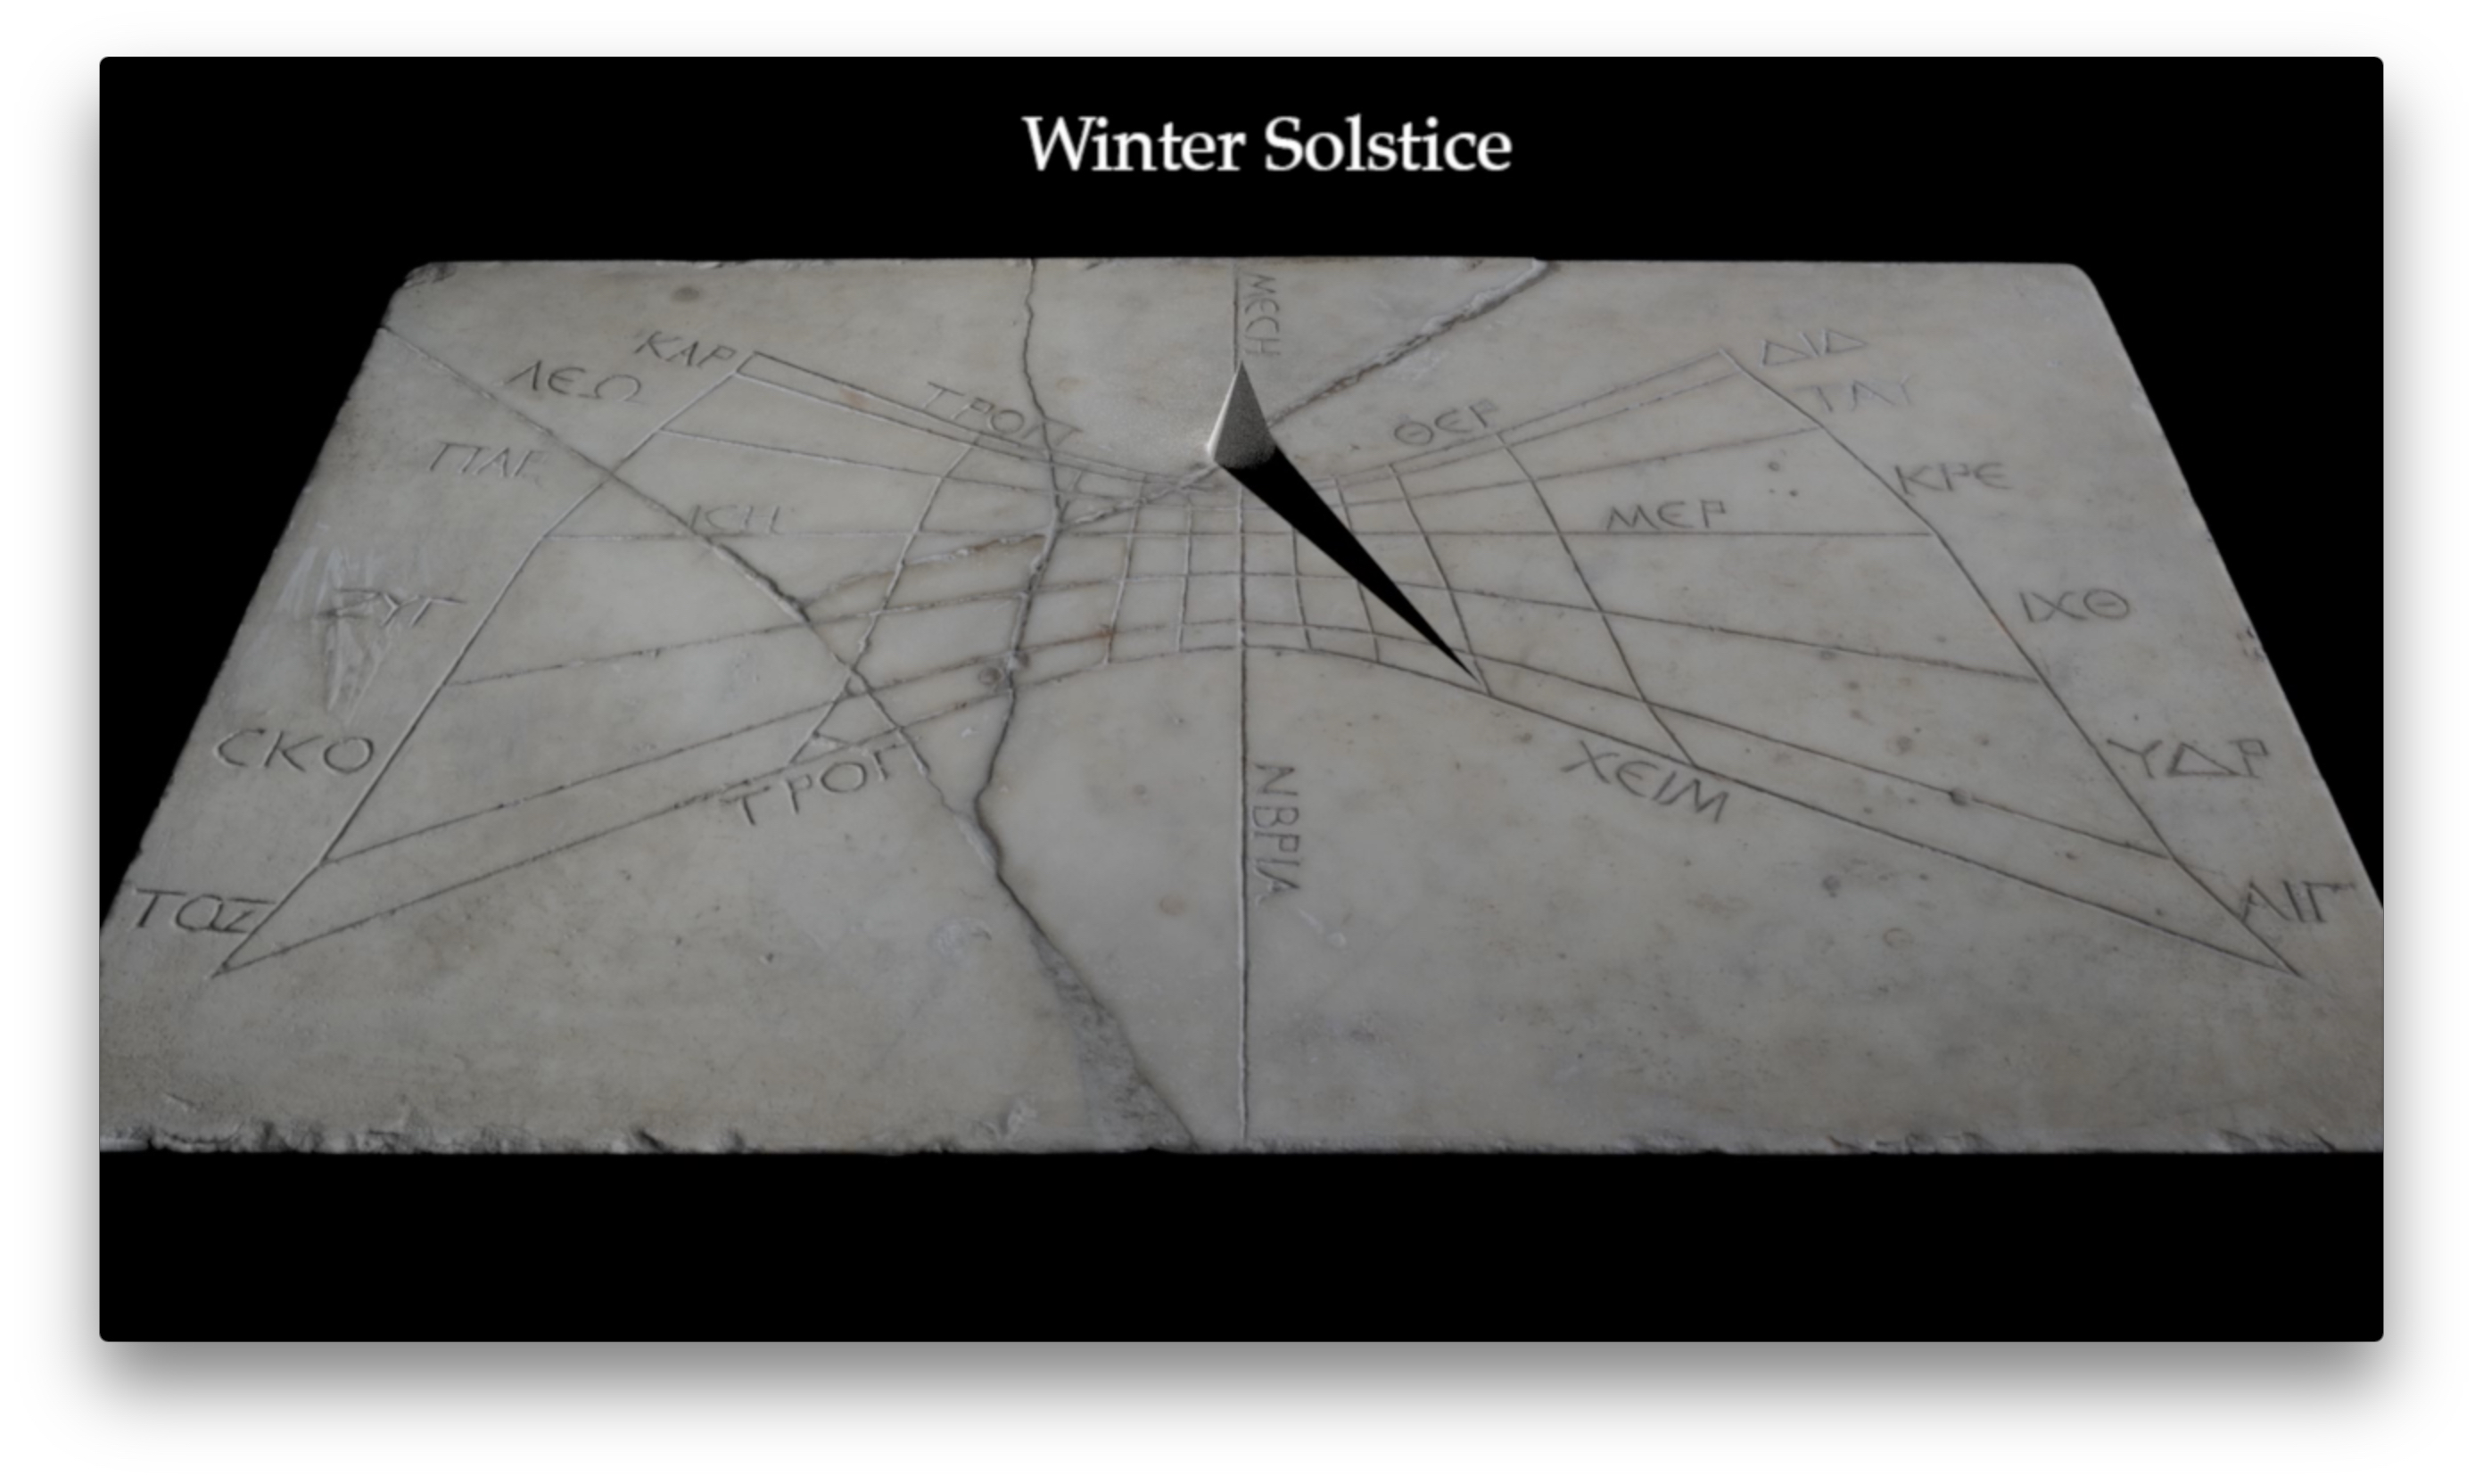 Rendering of shadow on the Pompeii Horizontal Sundial at three Roman hours before midday on the winter solstice, the shortest day of the year when the sun is low and shadows are long. The shadow is cast towards the lower right part of the sundial.